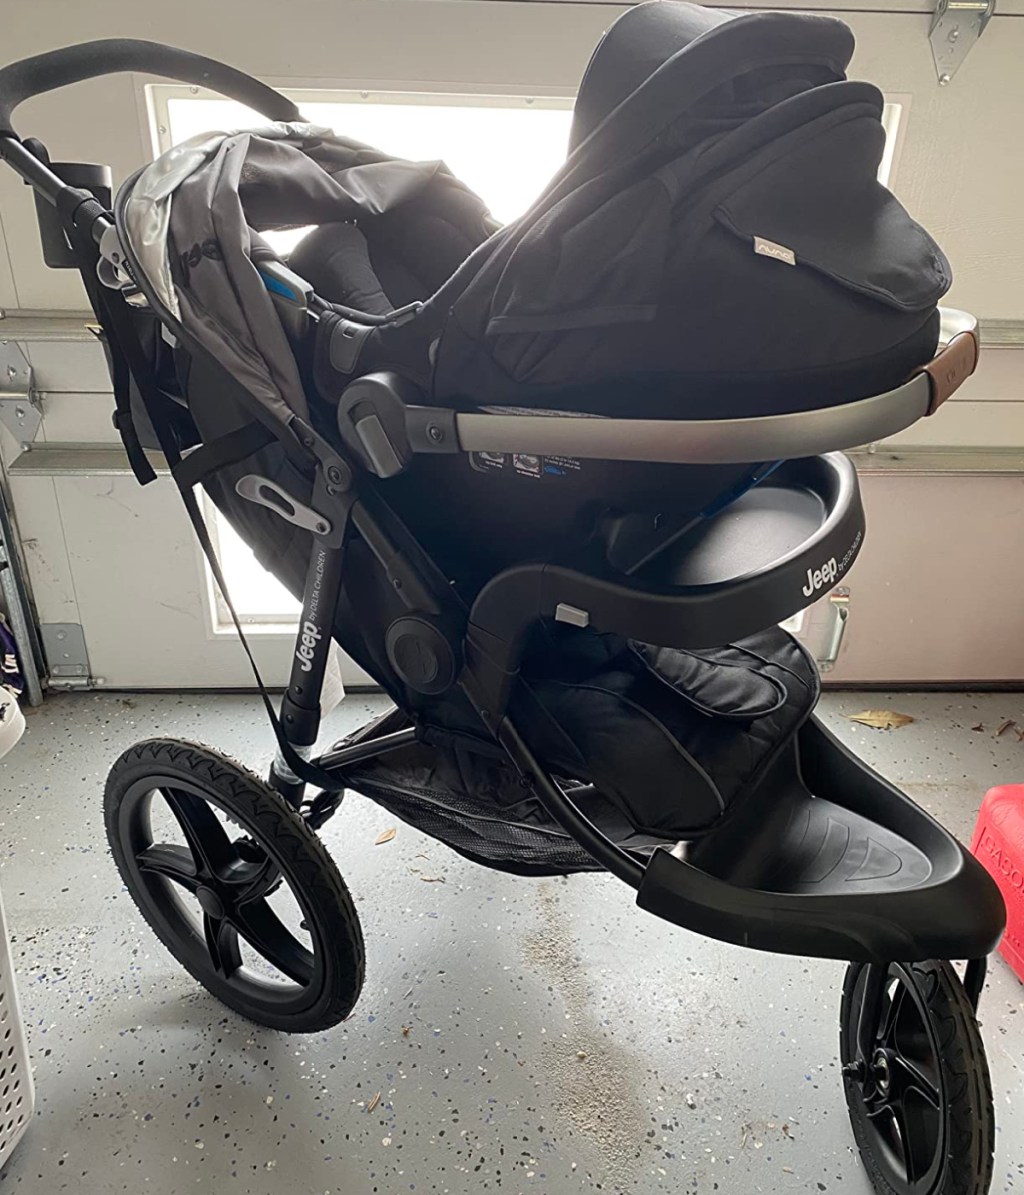 jeep jogging stroller with car seat in it